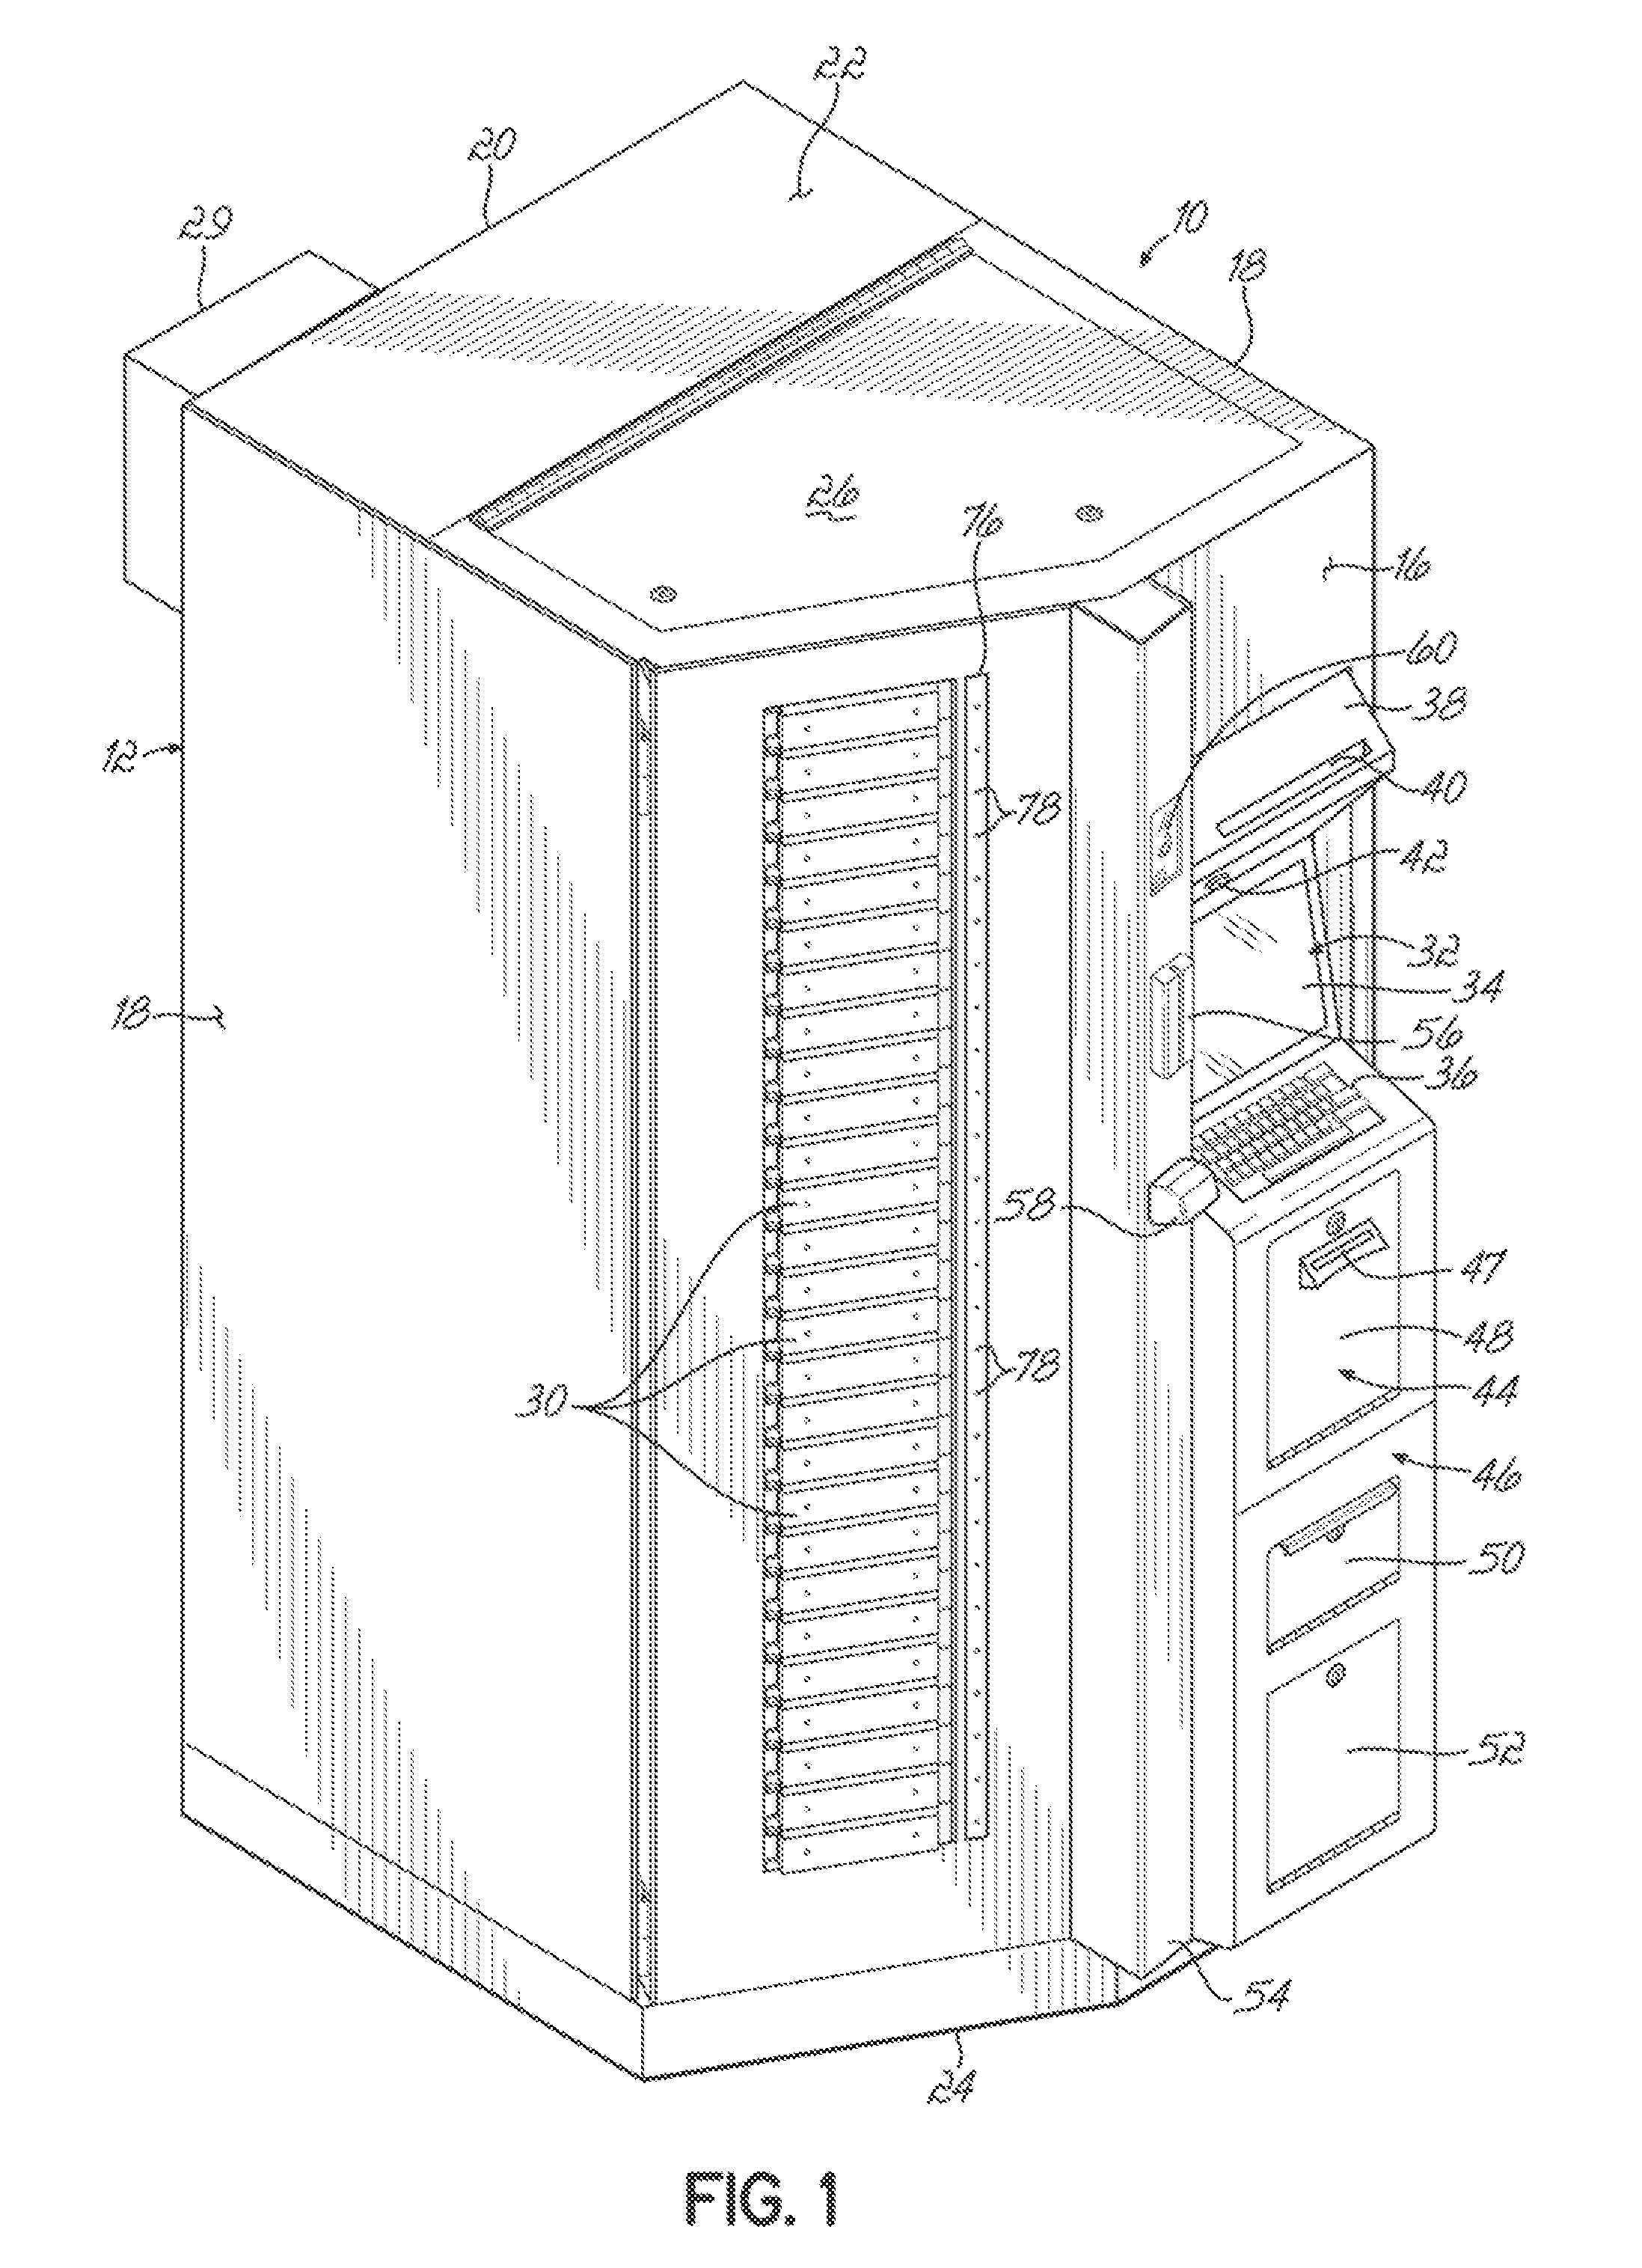 Method and apparatus for onsite distribution of medications and medical supplies